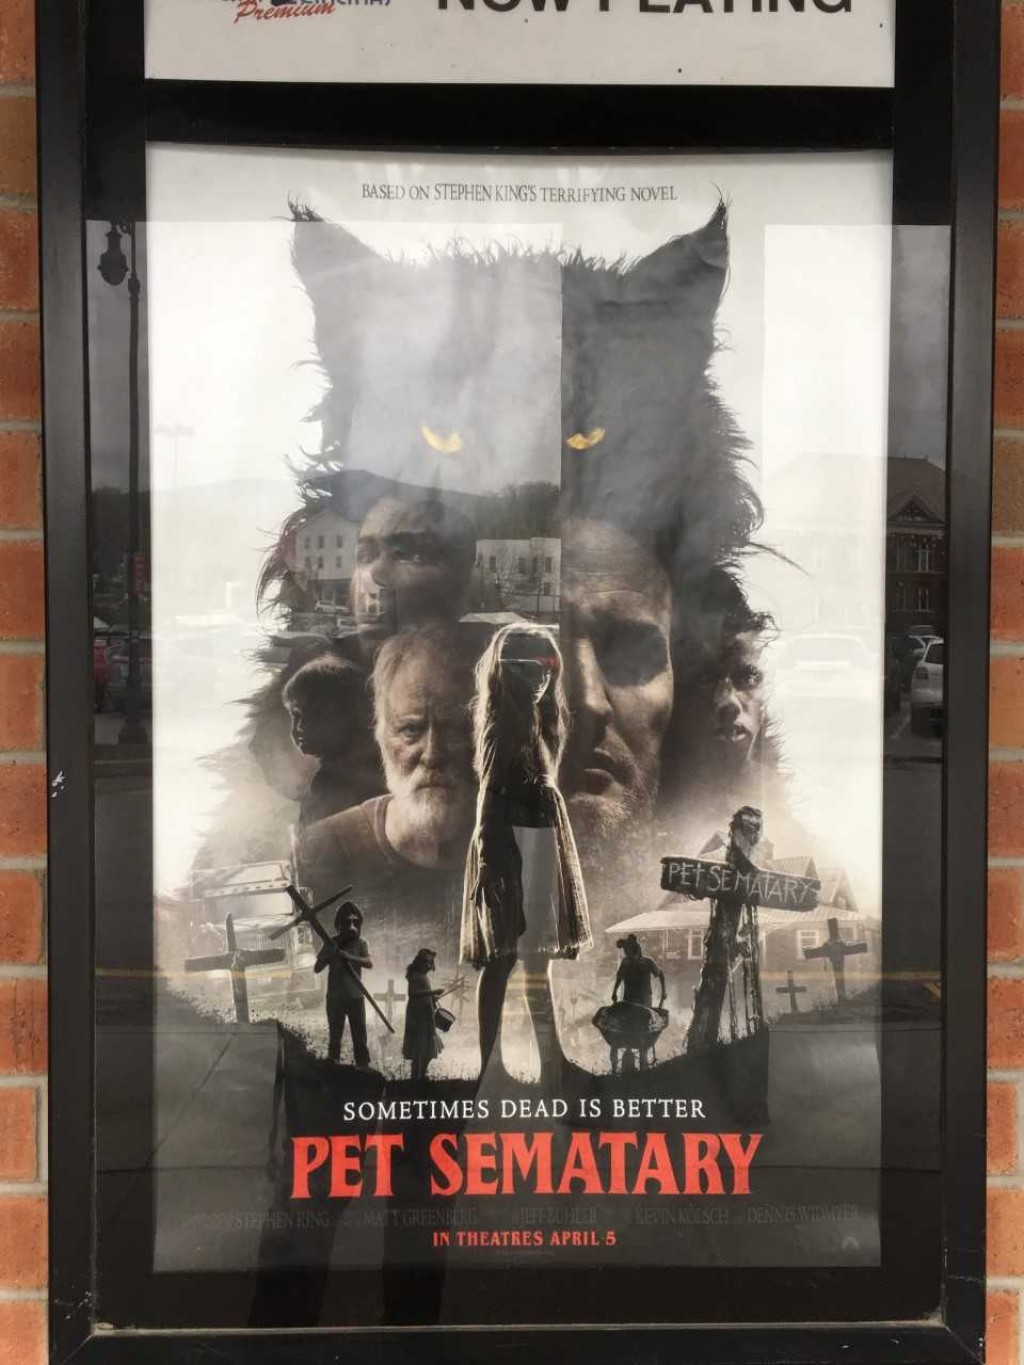 Pet Sematary really disappoints